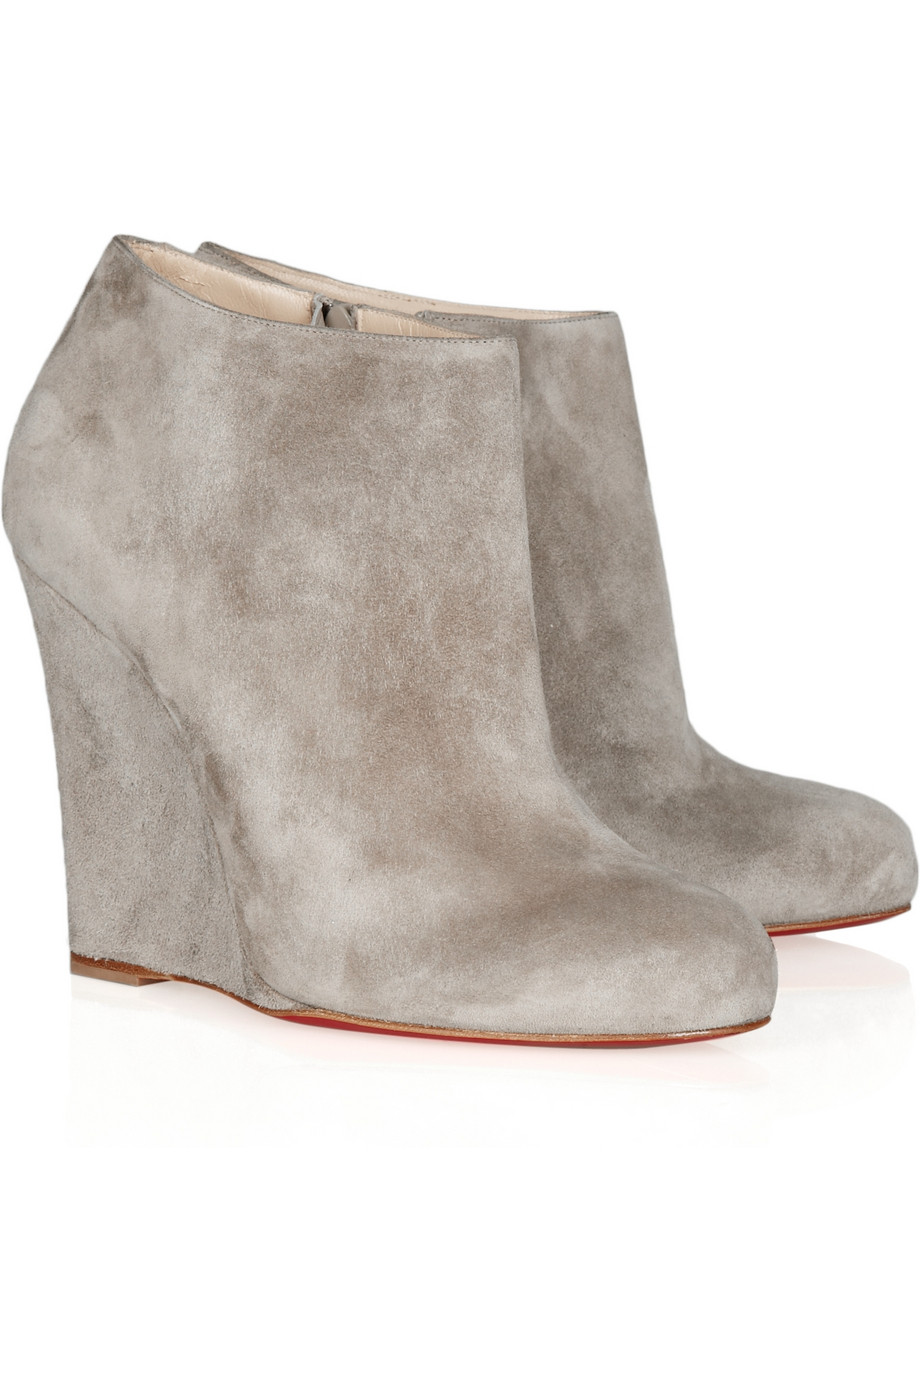 Christian Louboutin Belle Zeppa 100 Suede Ankle Boots in Gray | Lyst